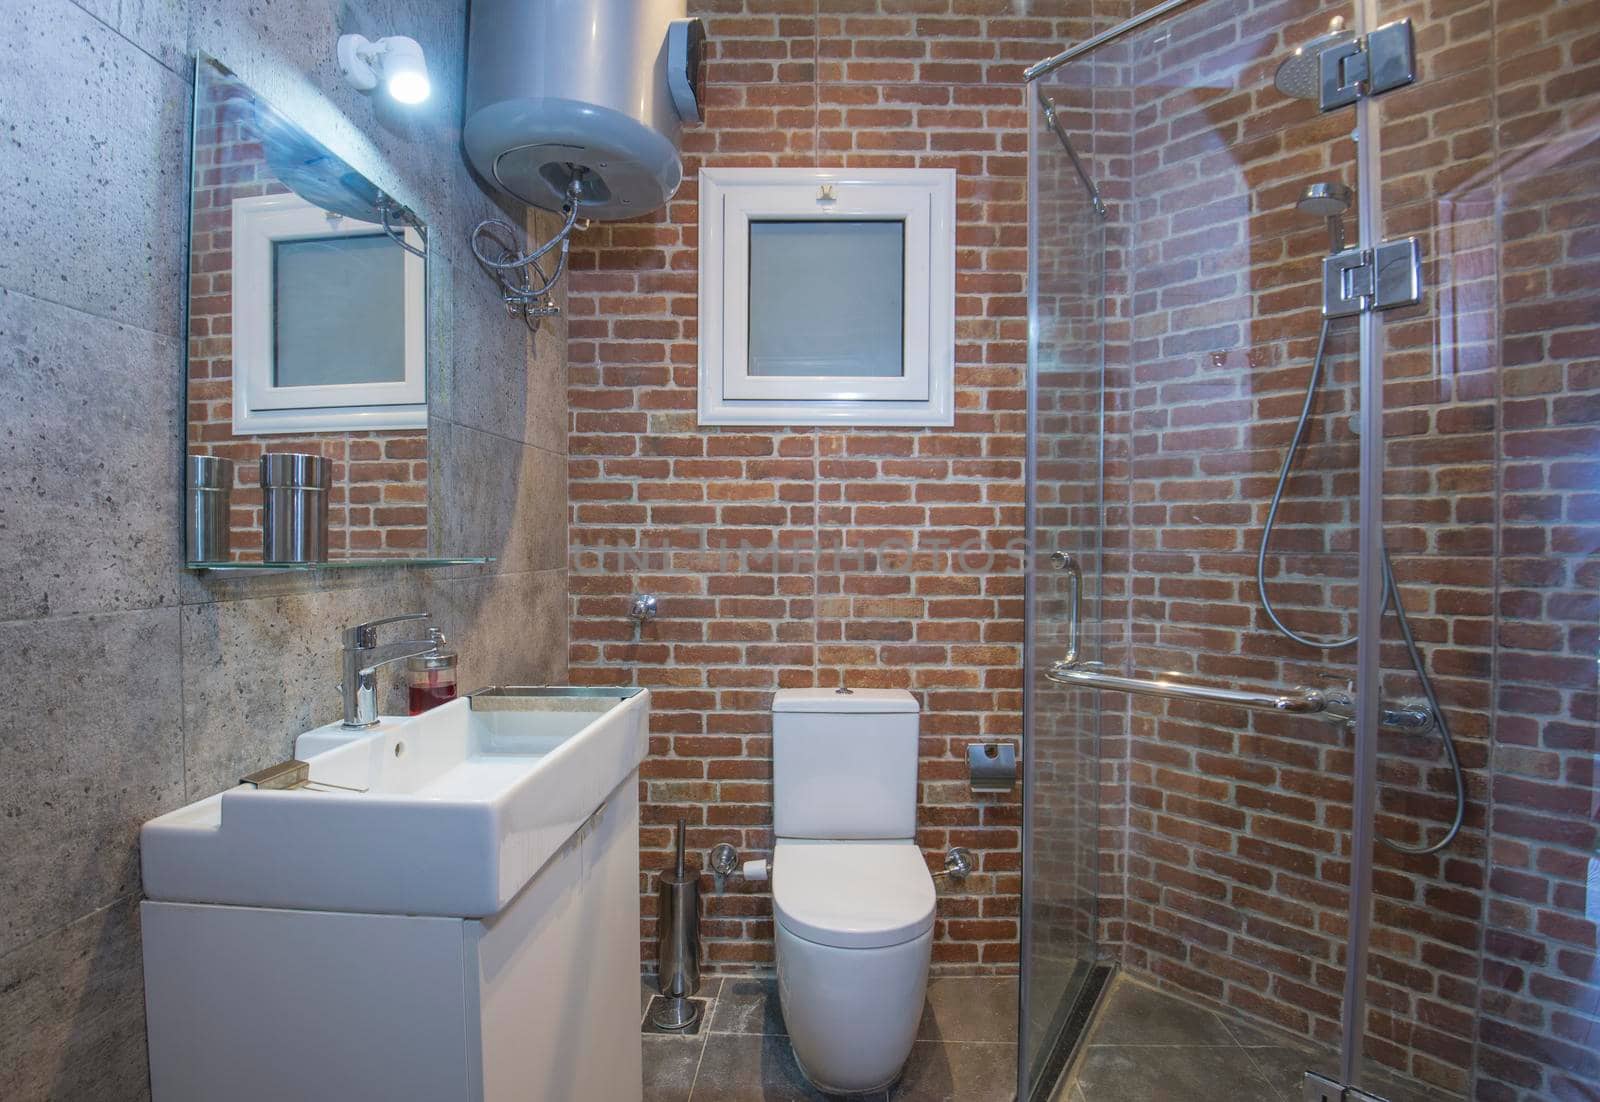 Interior design of a luxury show home bathroom with brick wall effect shower cubicle and sink